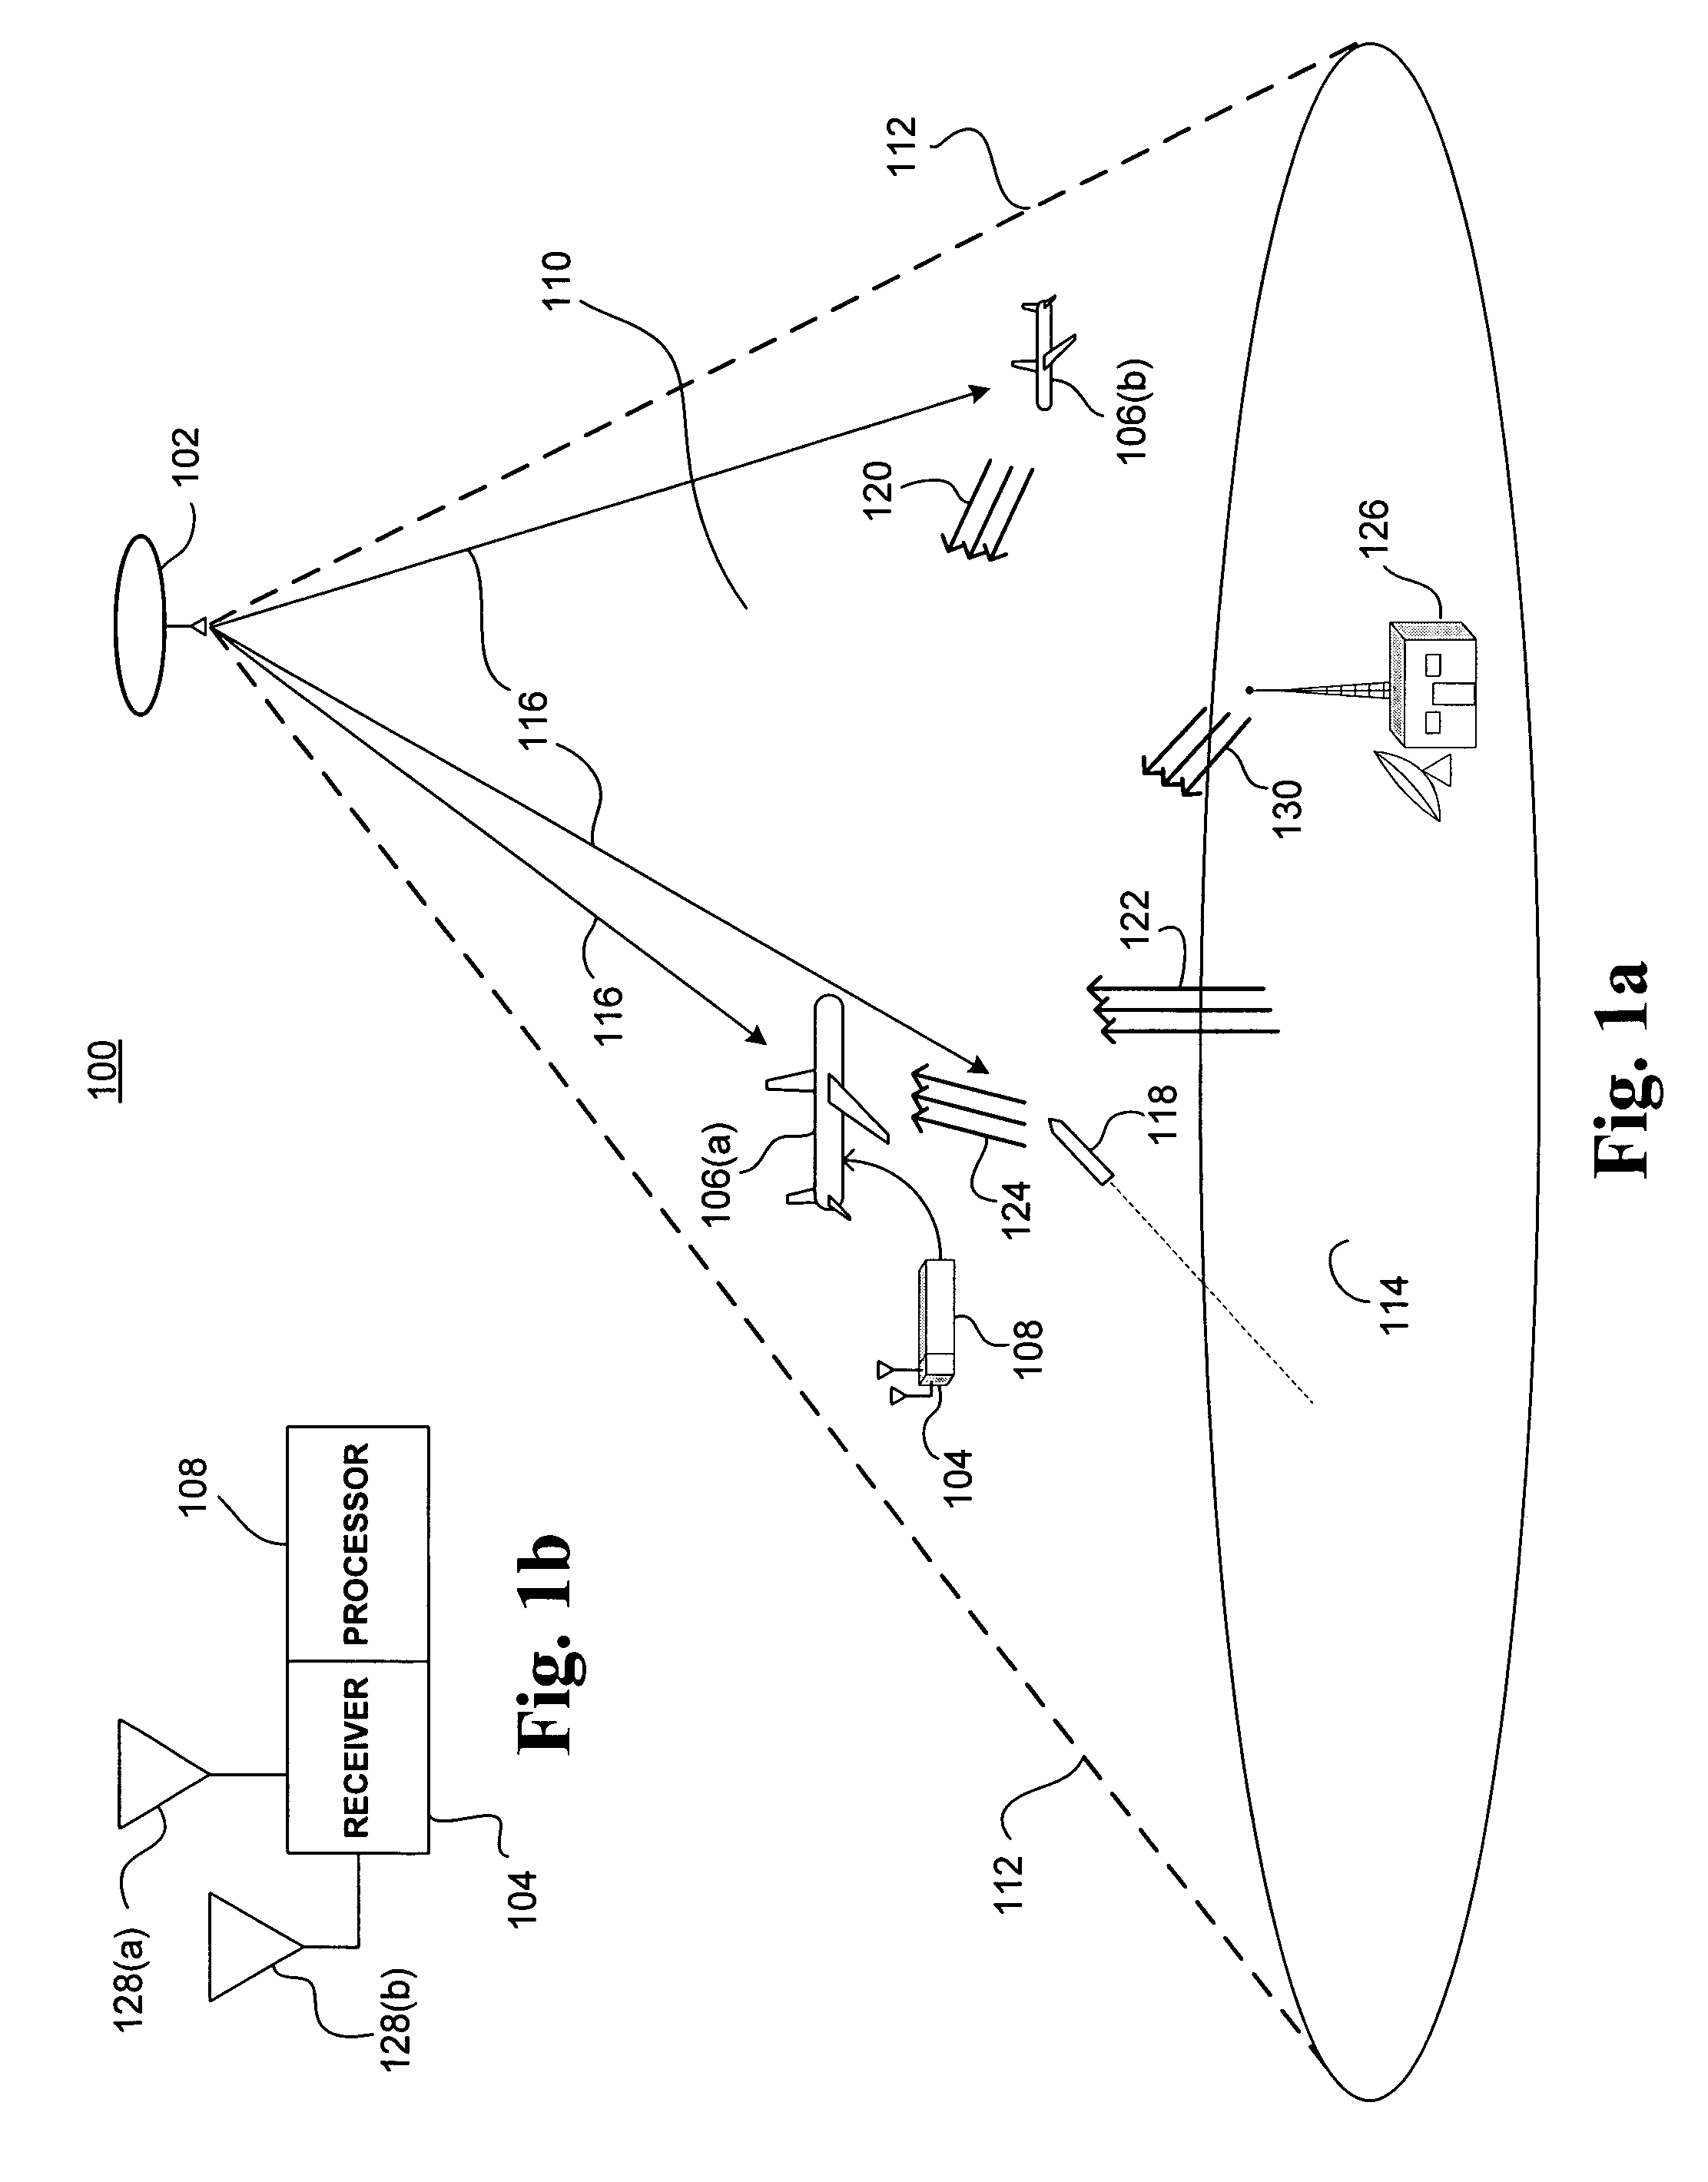 System and method for onboard detection of ballistic threats to aircraft